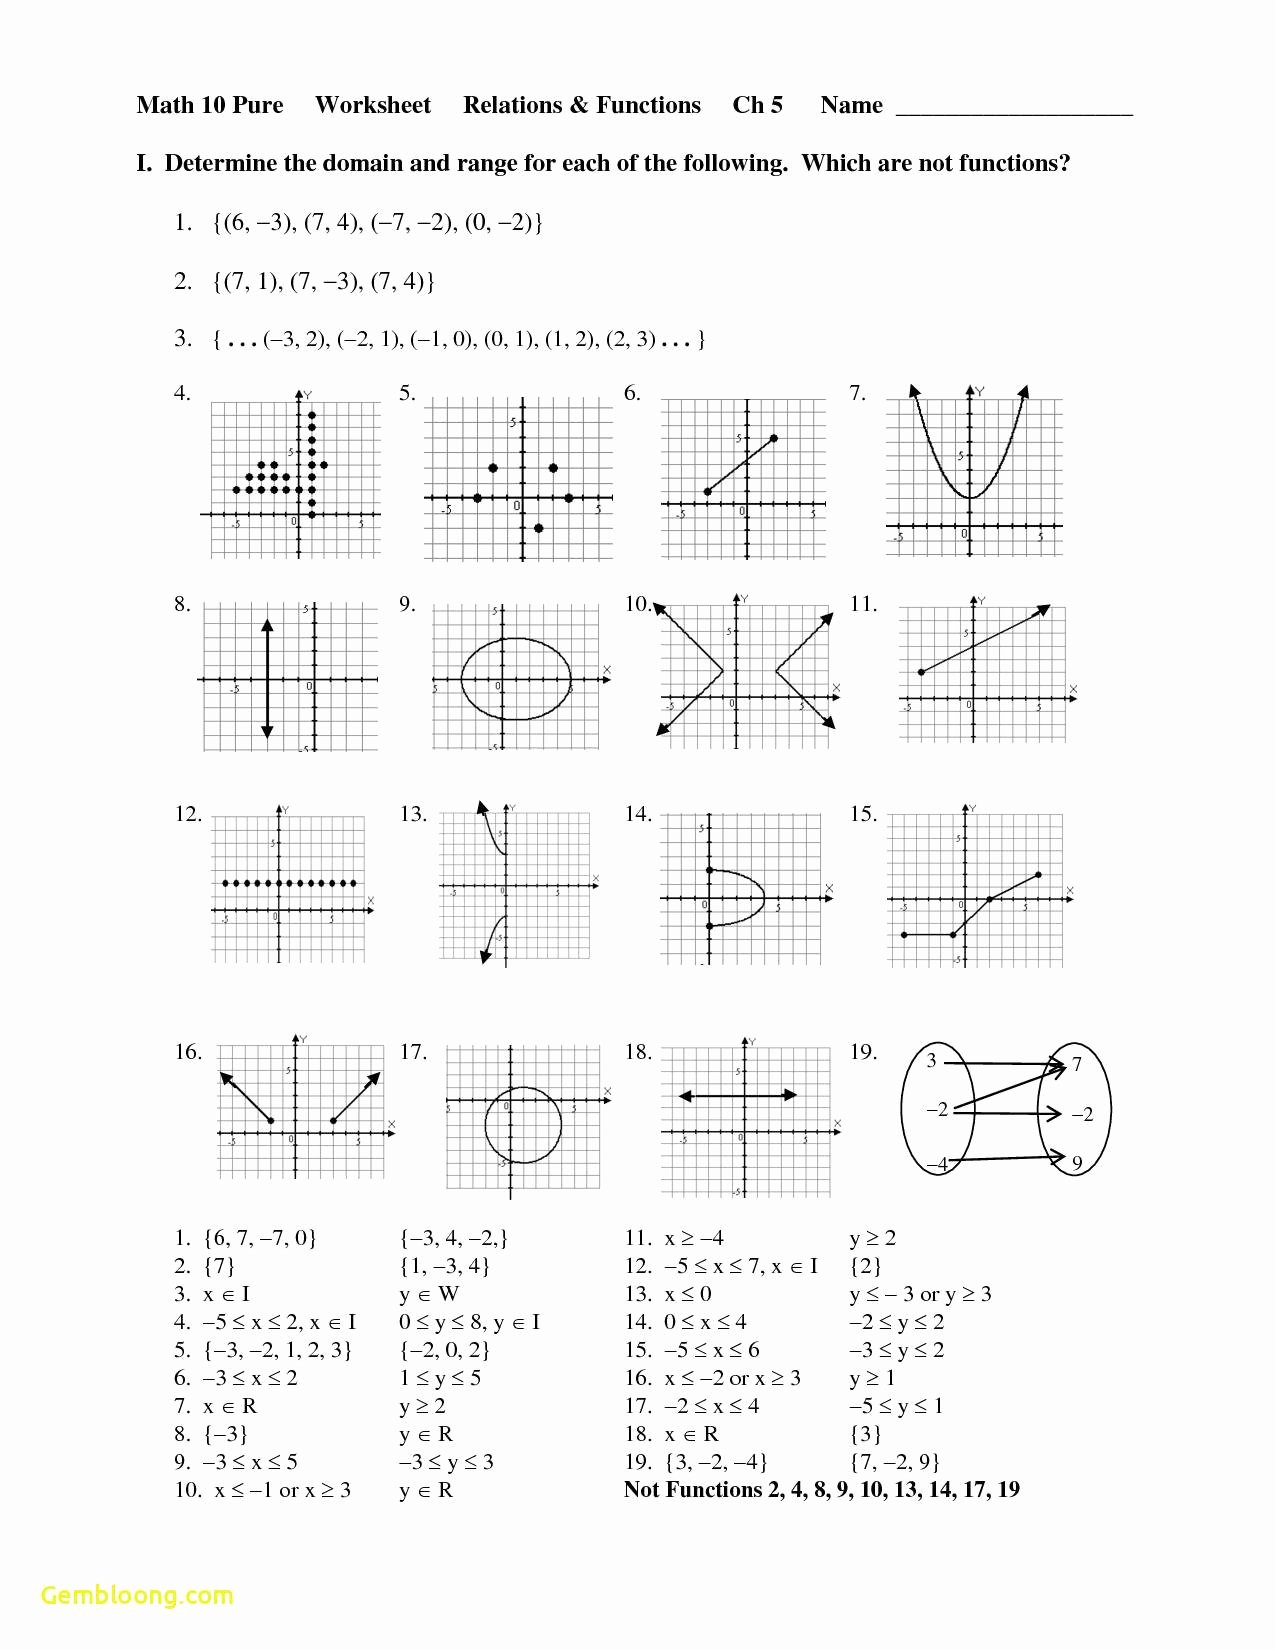 Quadratic Functions Worksheet with Answers New Graphing Quadratic Functions Worksheet Answer Key